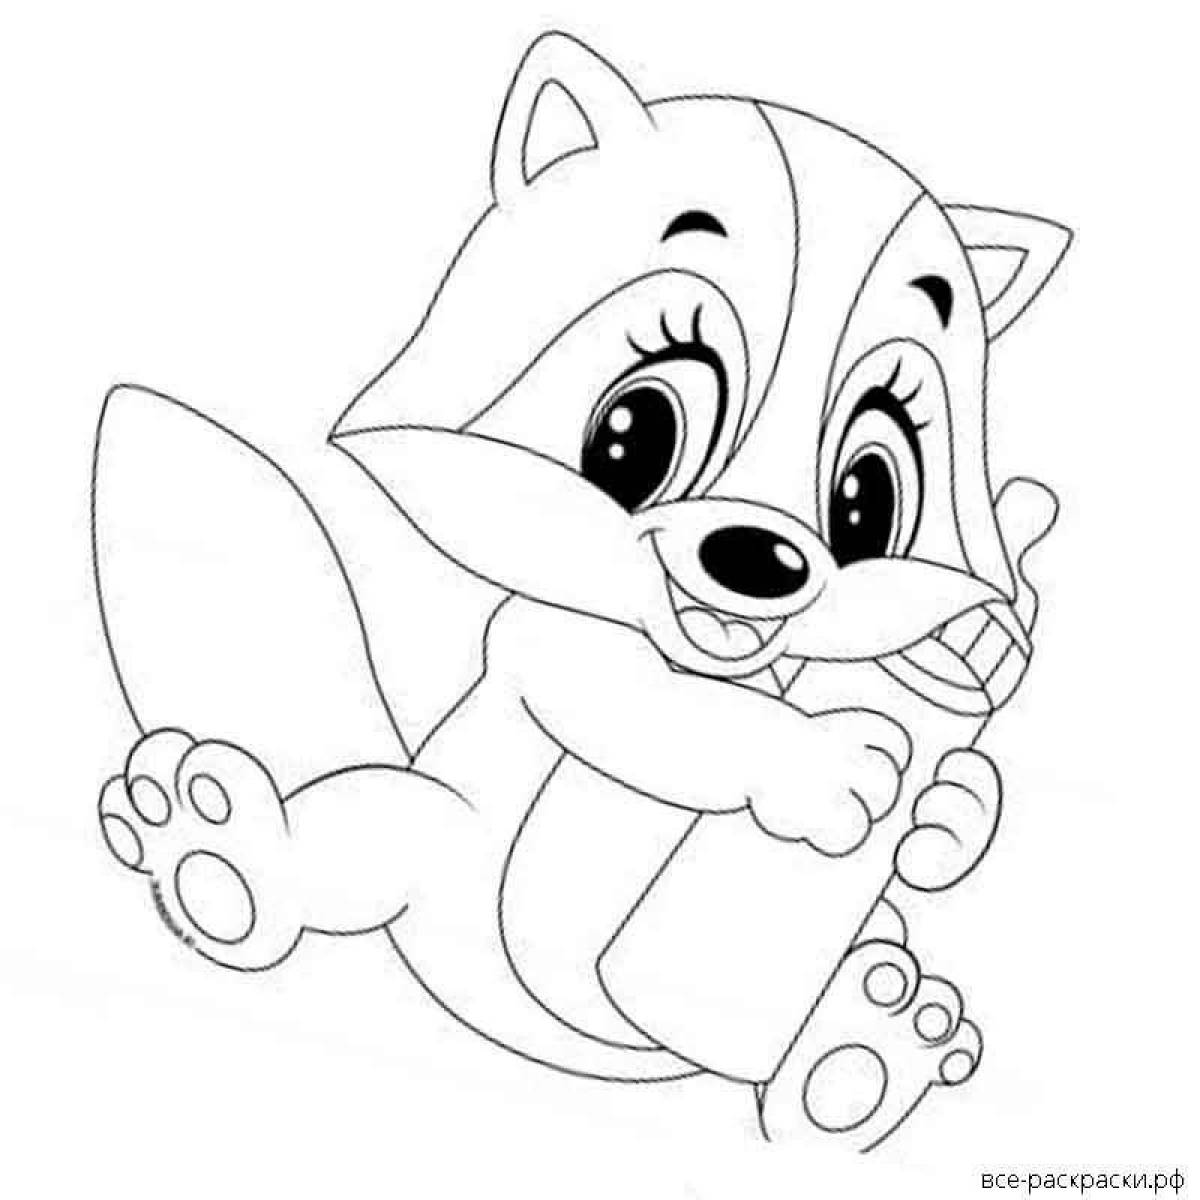 Raccoon coloring pages for kids